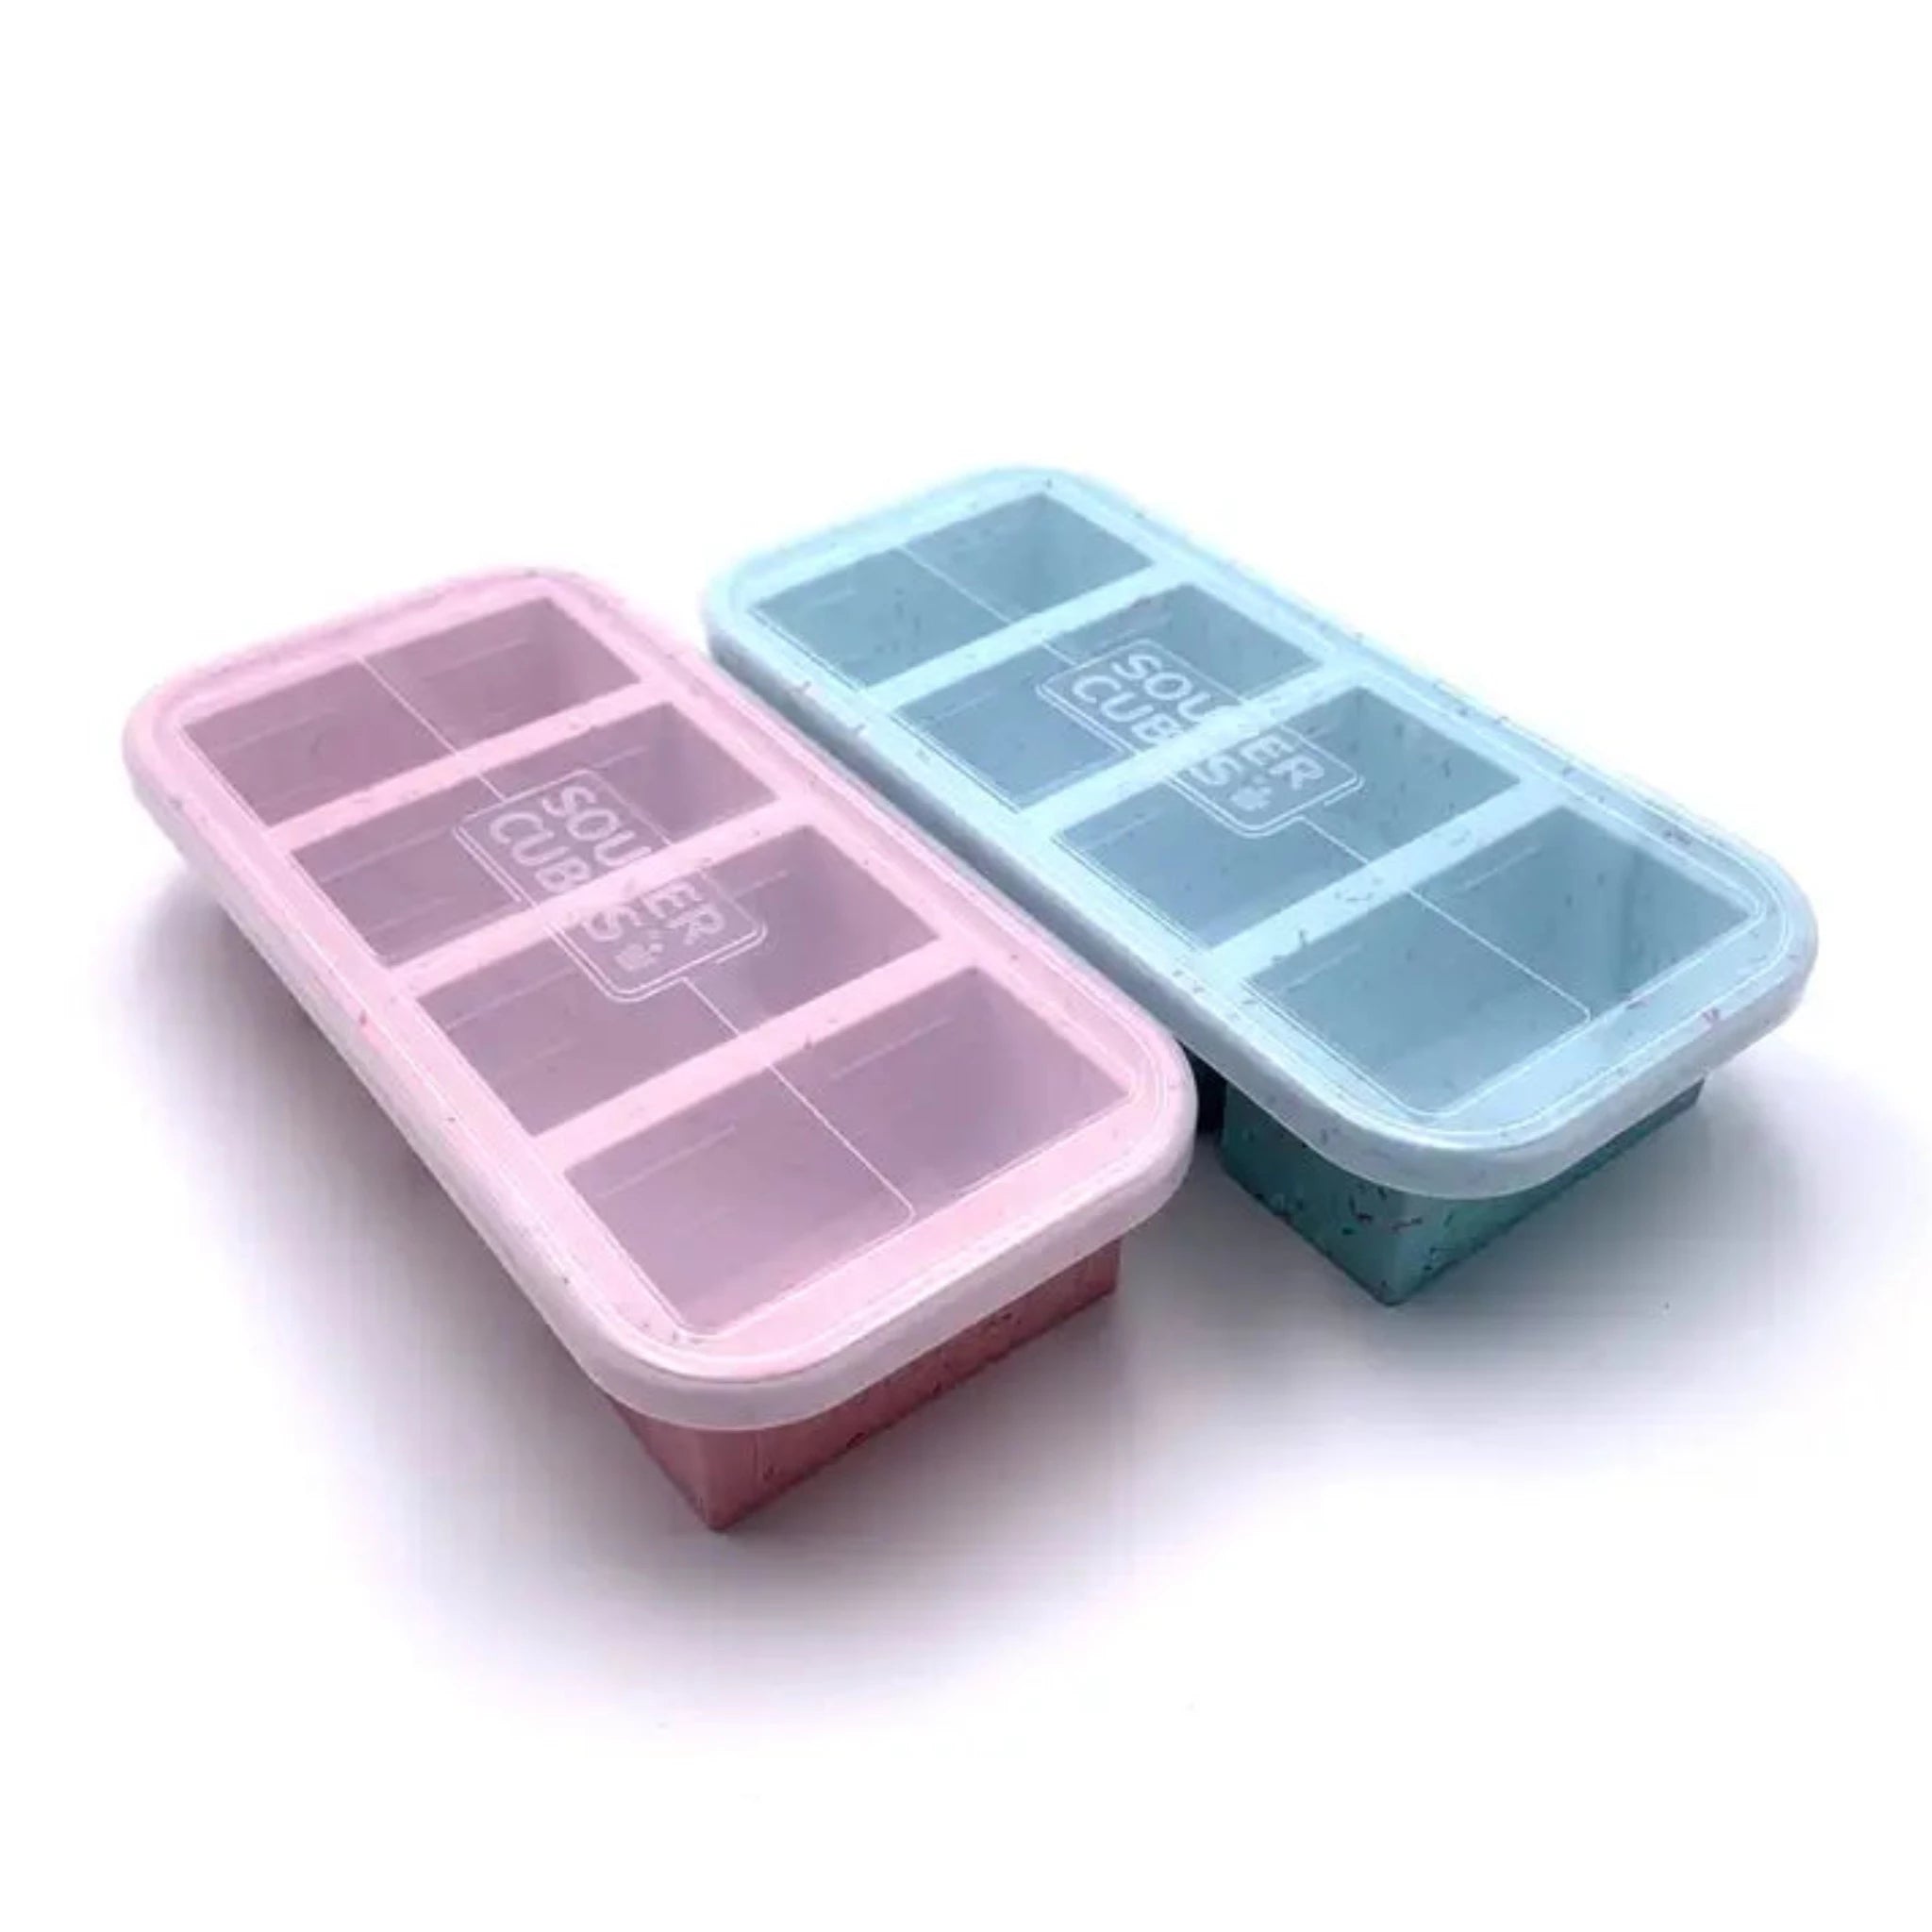 Souper Cubes 1-Cup Silicone Freezing Tray - Freeze and Store Food